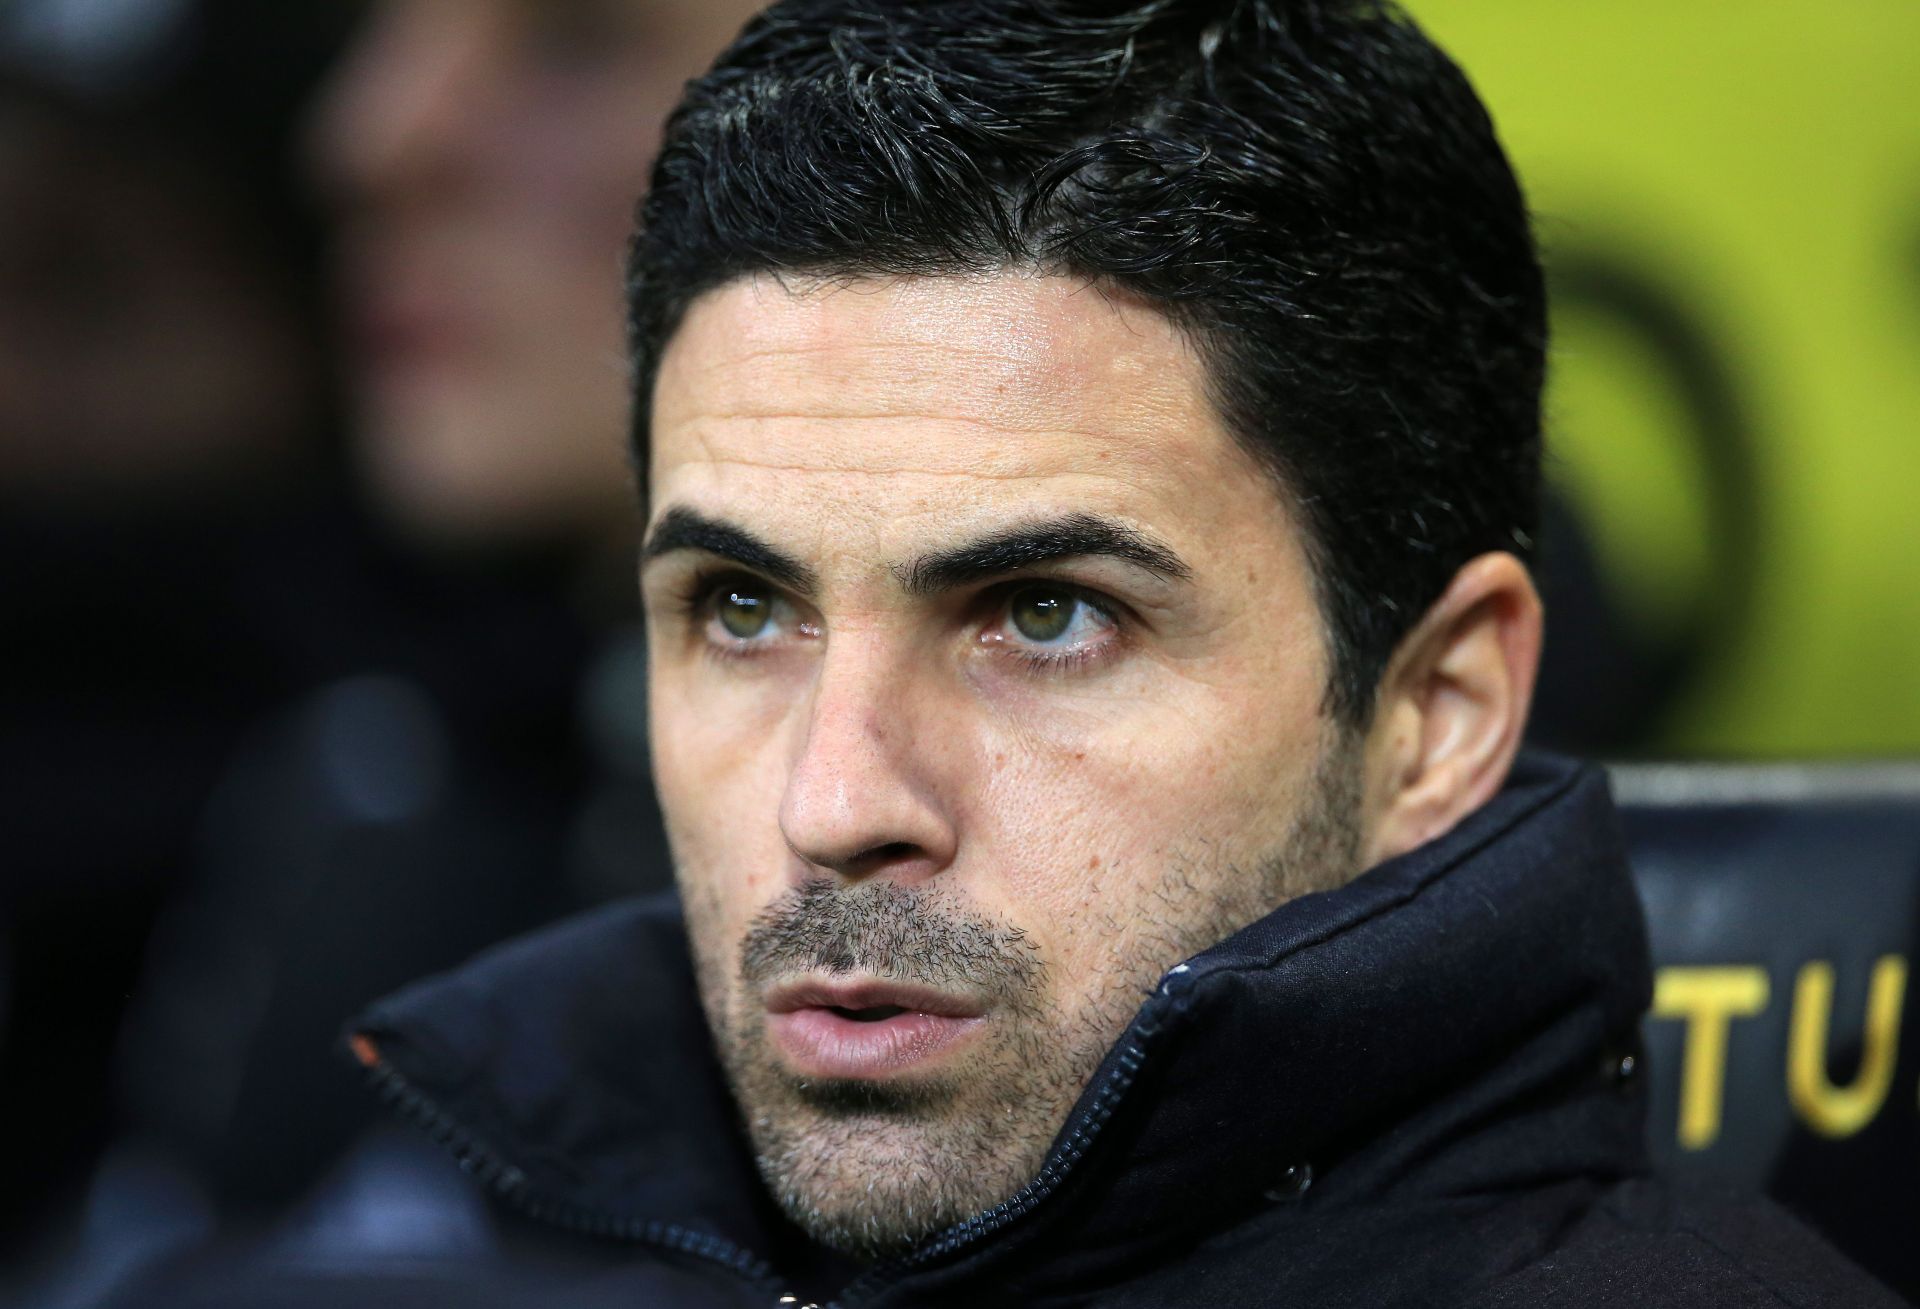 Mikel Arteta is vying for a top-four place in the Premier League this season.